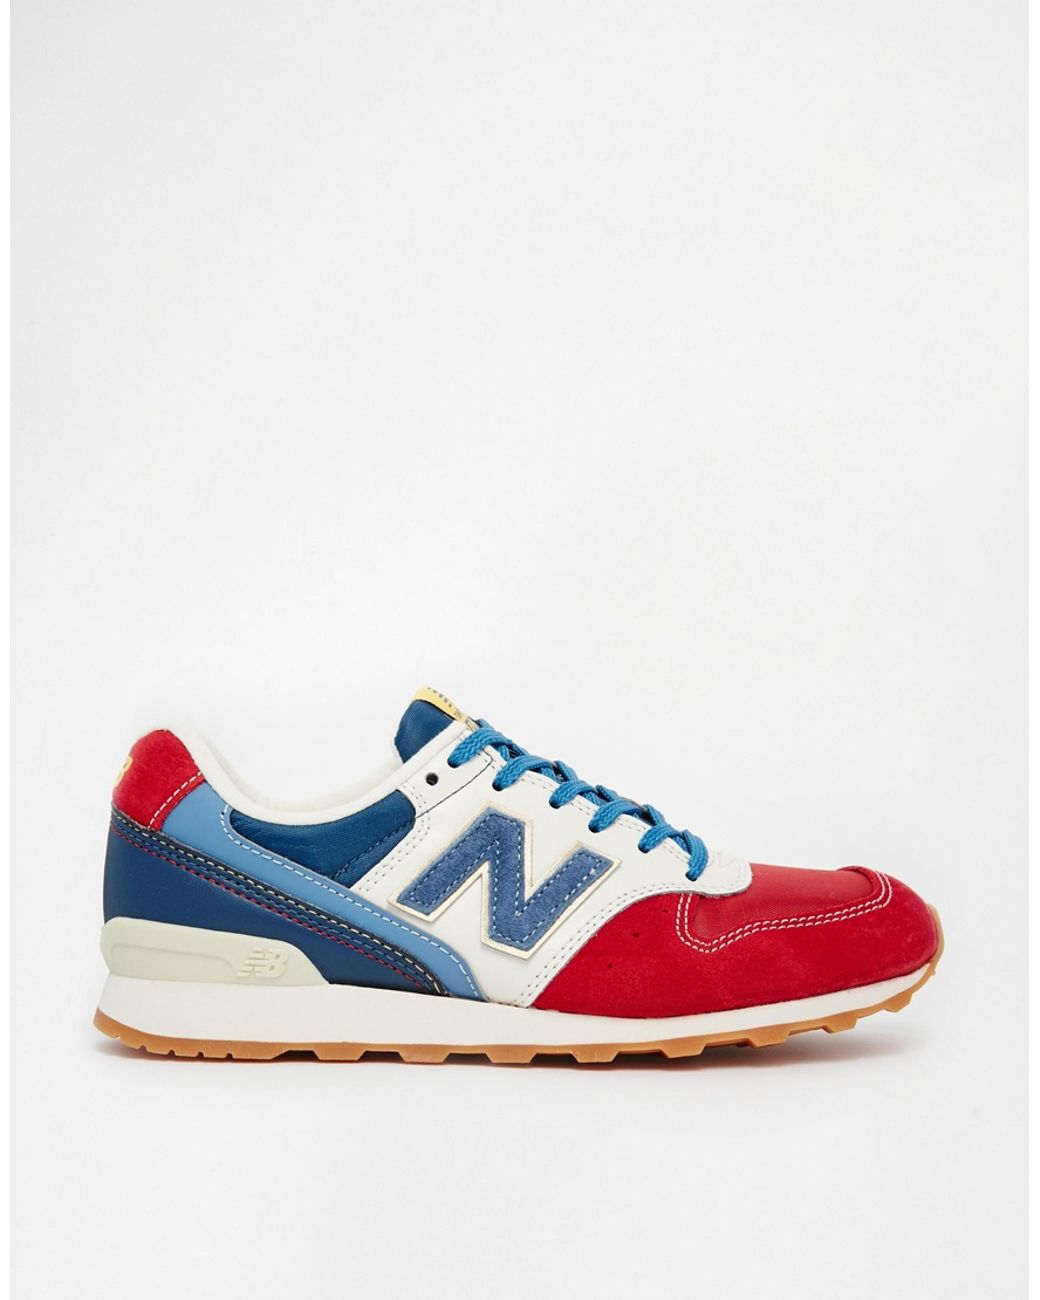 New Balance 996 Suede Red White Blue Sneakers | Lyst Canada